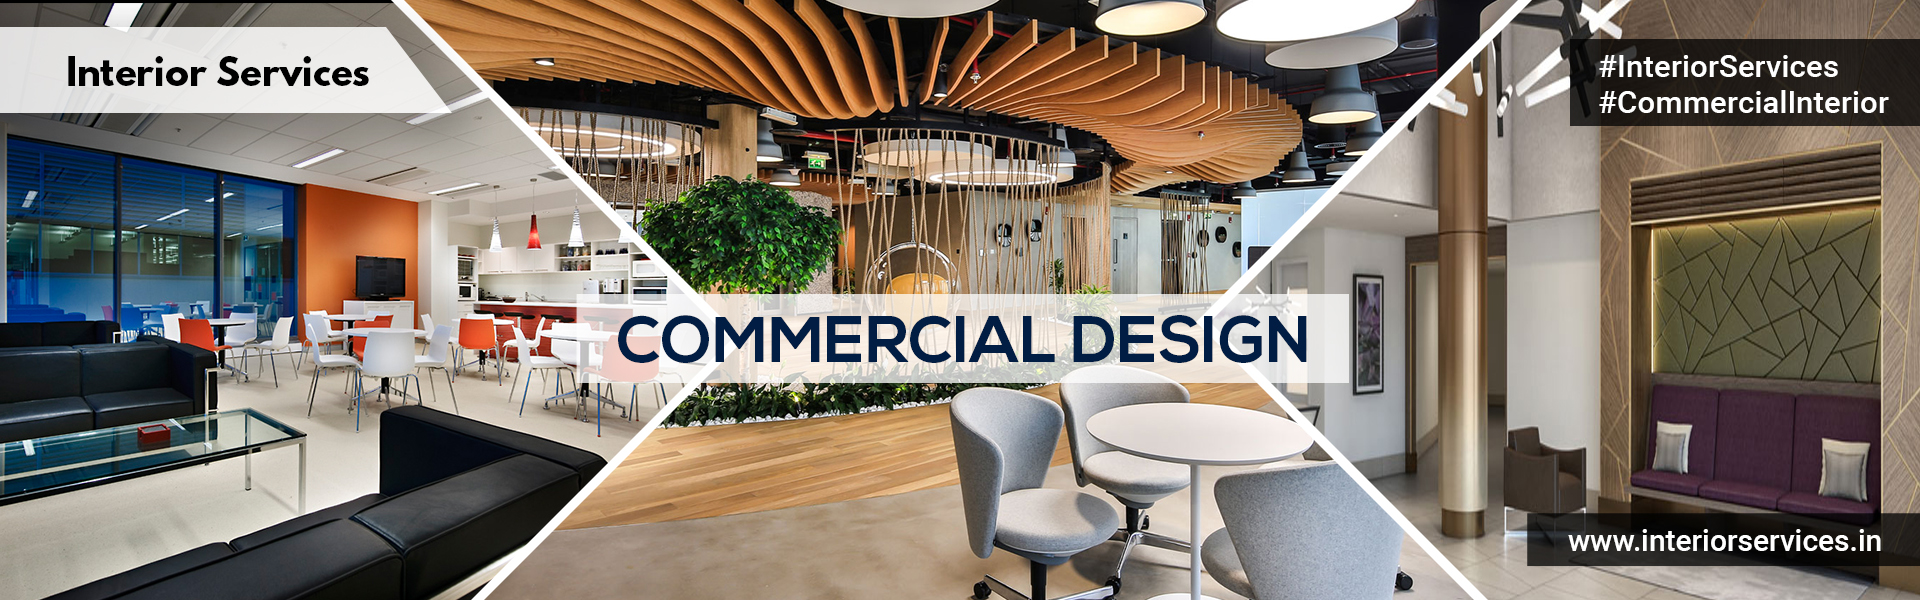 Interior Services Commercial Design Image